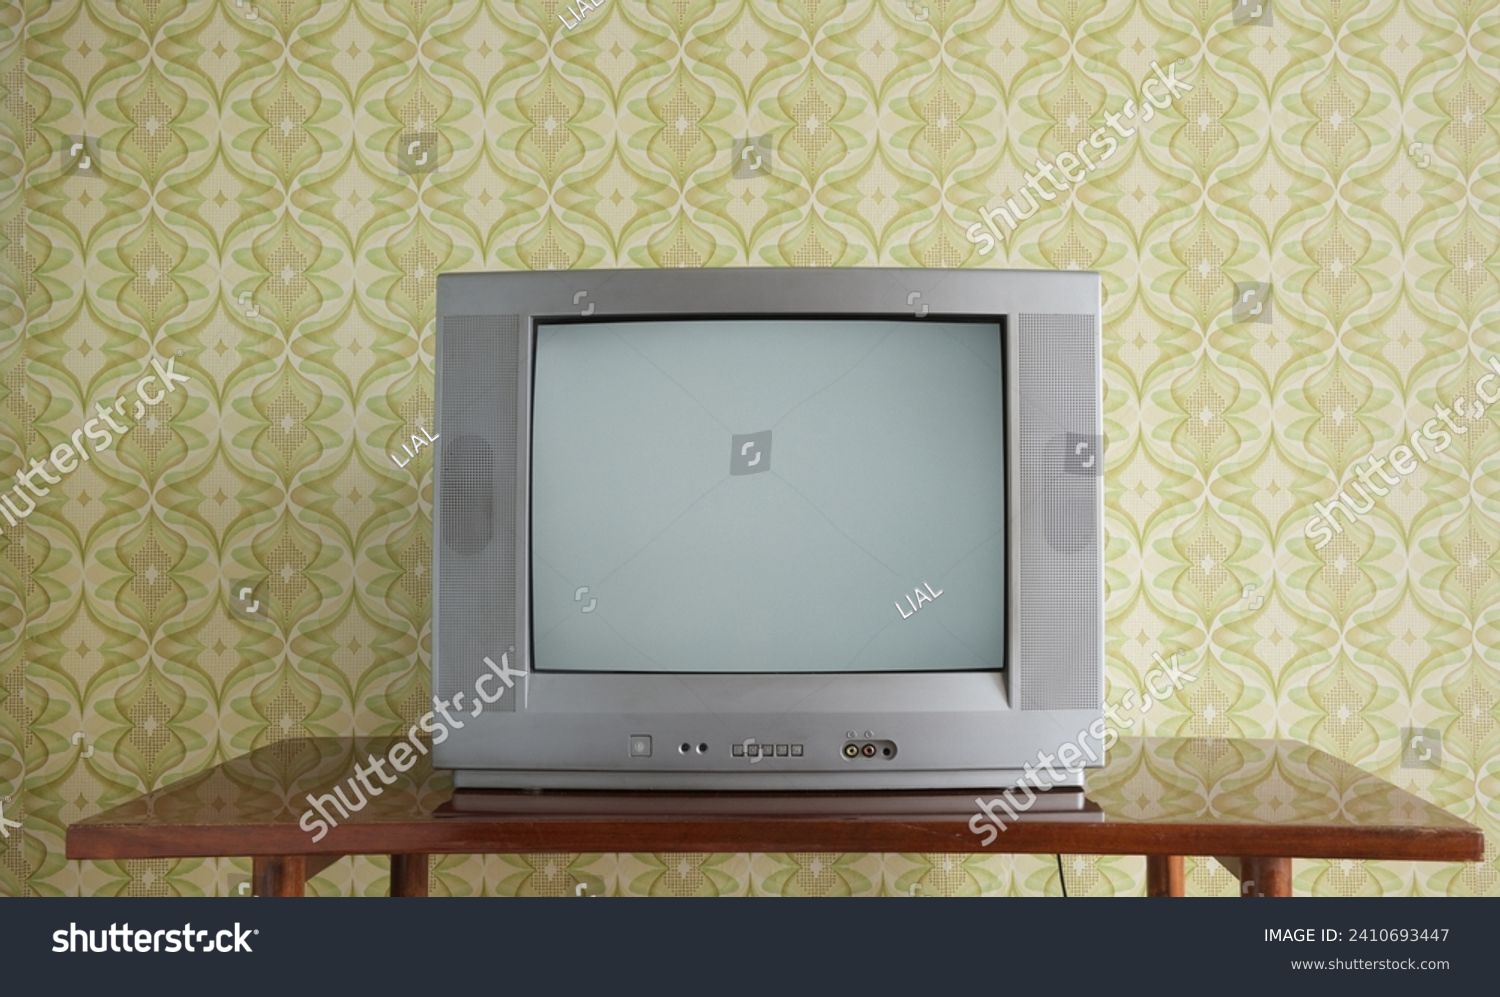 Old TV on the nightstand against the background of wallpaper. #2410693447